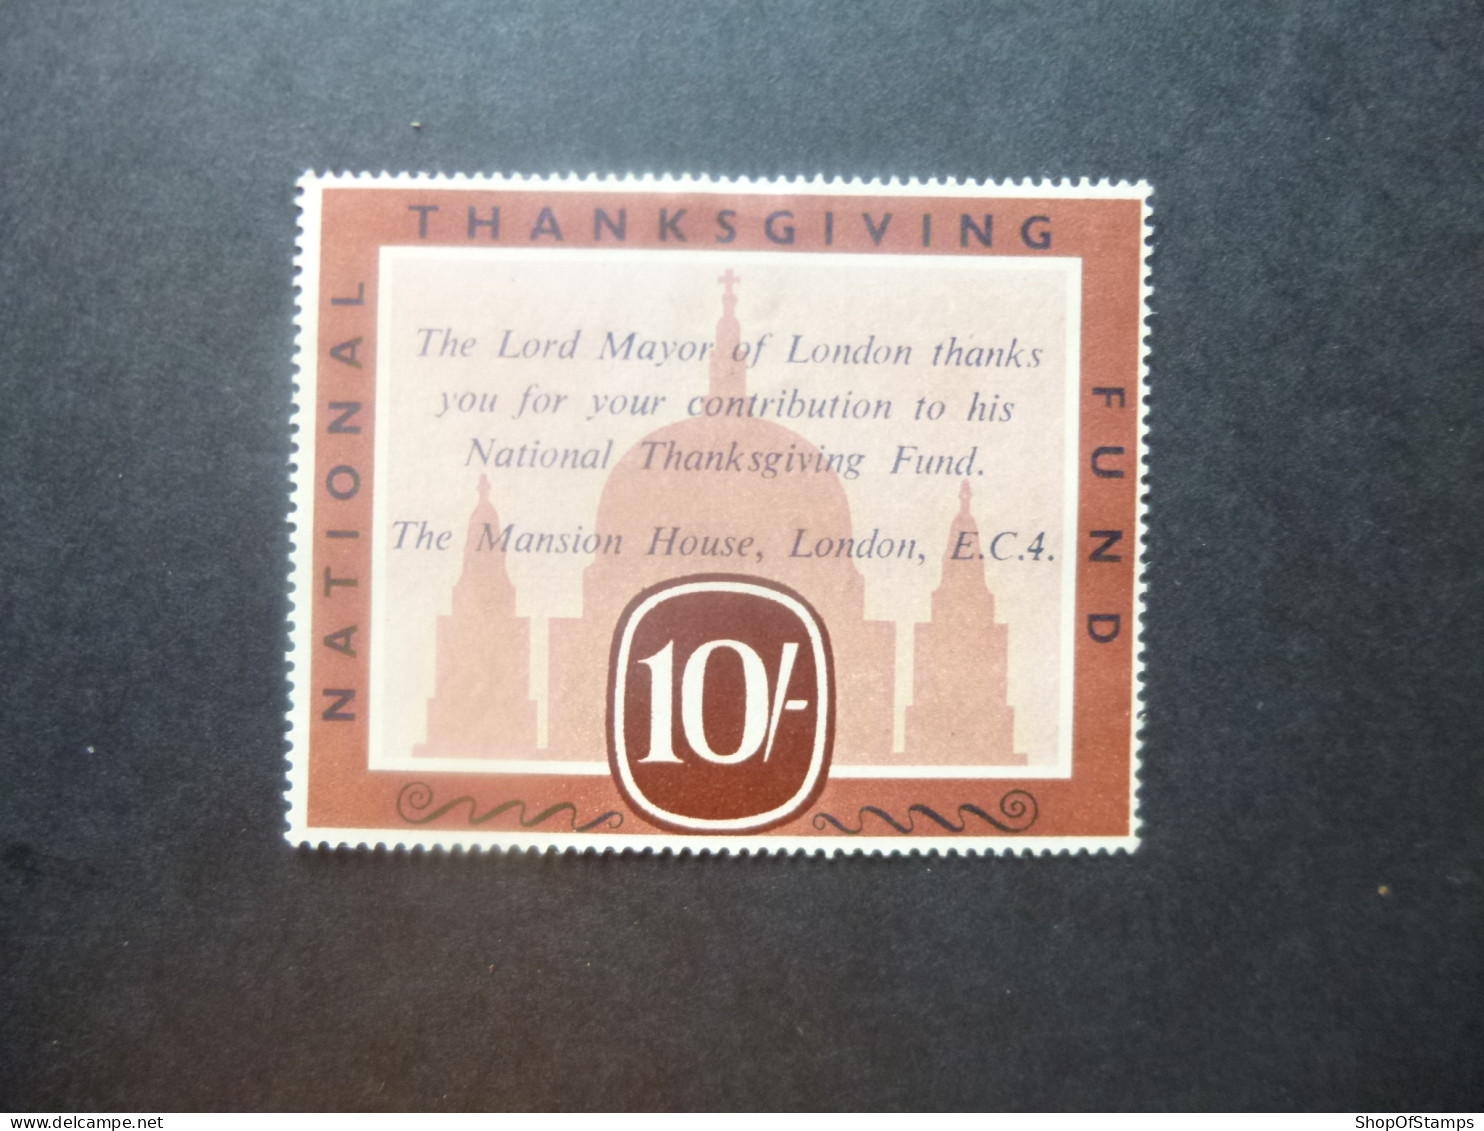 GREAT BRITAIN LABEL NATIONAL THANKS GIVING FUND OF LORD MAYOR LONDON 10sh SG NATIONAL THANKS GIVING FUND LABEL 10s - Cinderella